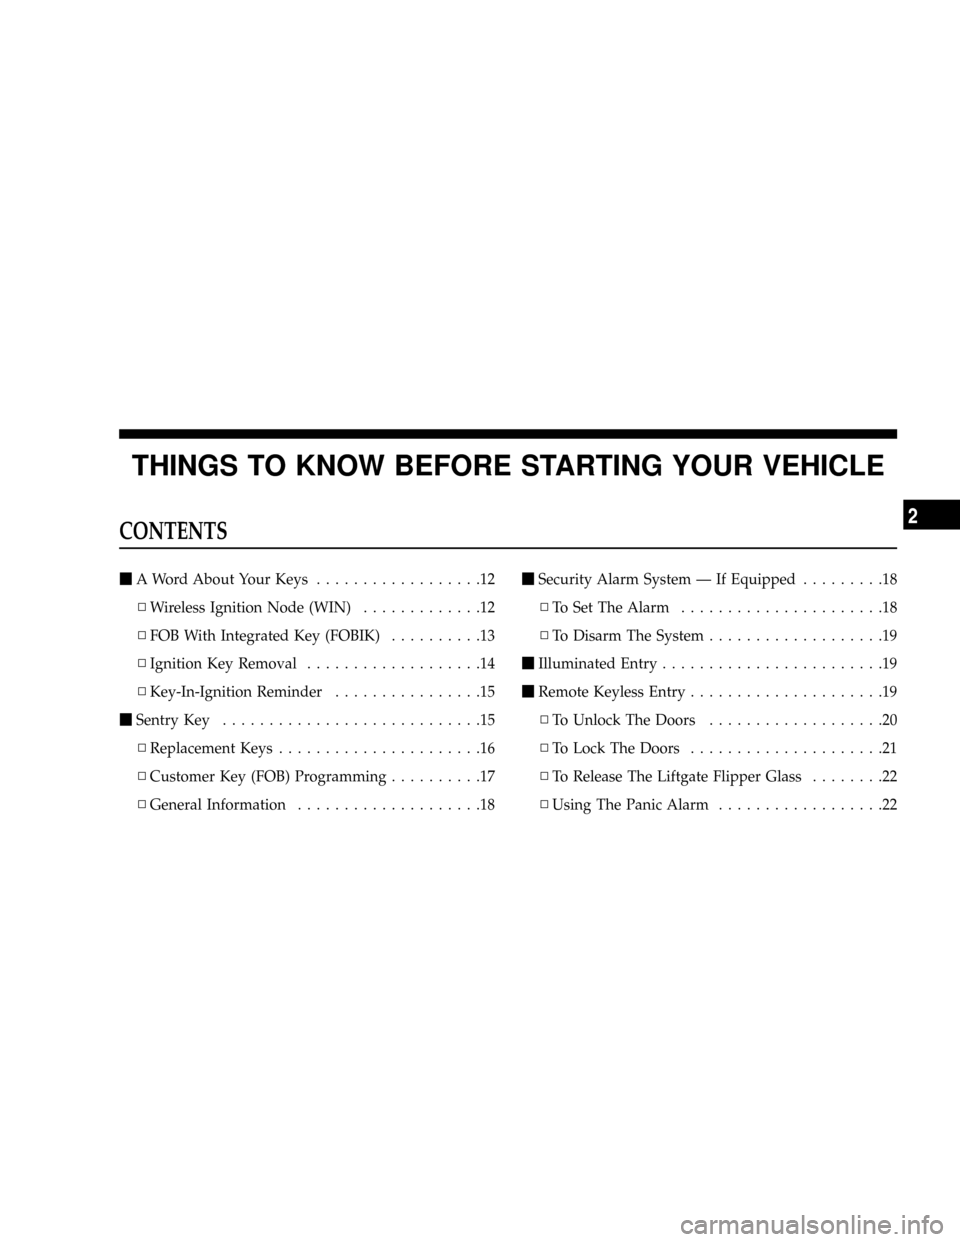 JEEP GRAND CHEROKEE 2008 WK / 3.G SRT Owners Manual THINGS TO KNOW BEFORE STARTING YOUR VEHICLE
CONTENTS
mA Word About Your Keys..................12
NWireless Ignition Node (WIN).............12
NFOB With Integrated Key (FOBIK)..........13
NIgnition Key